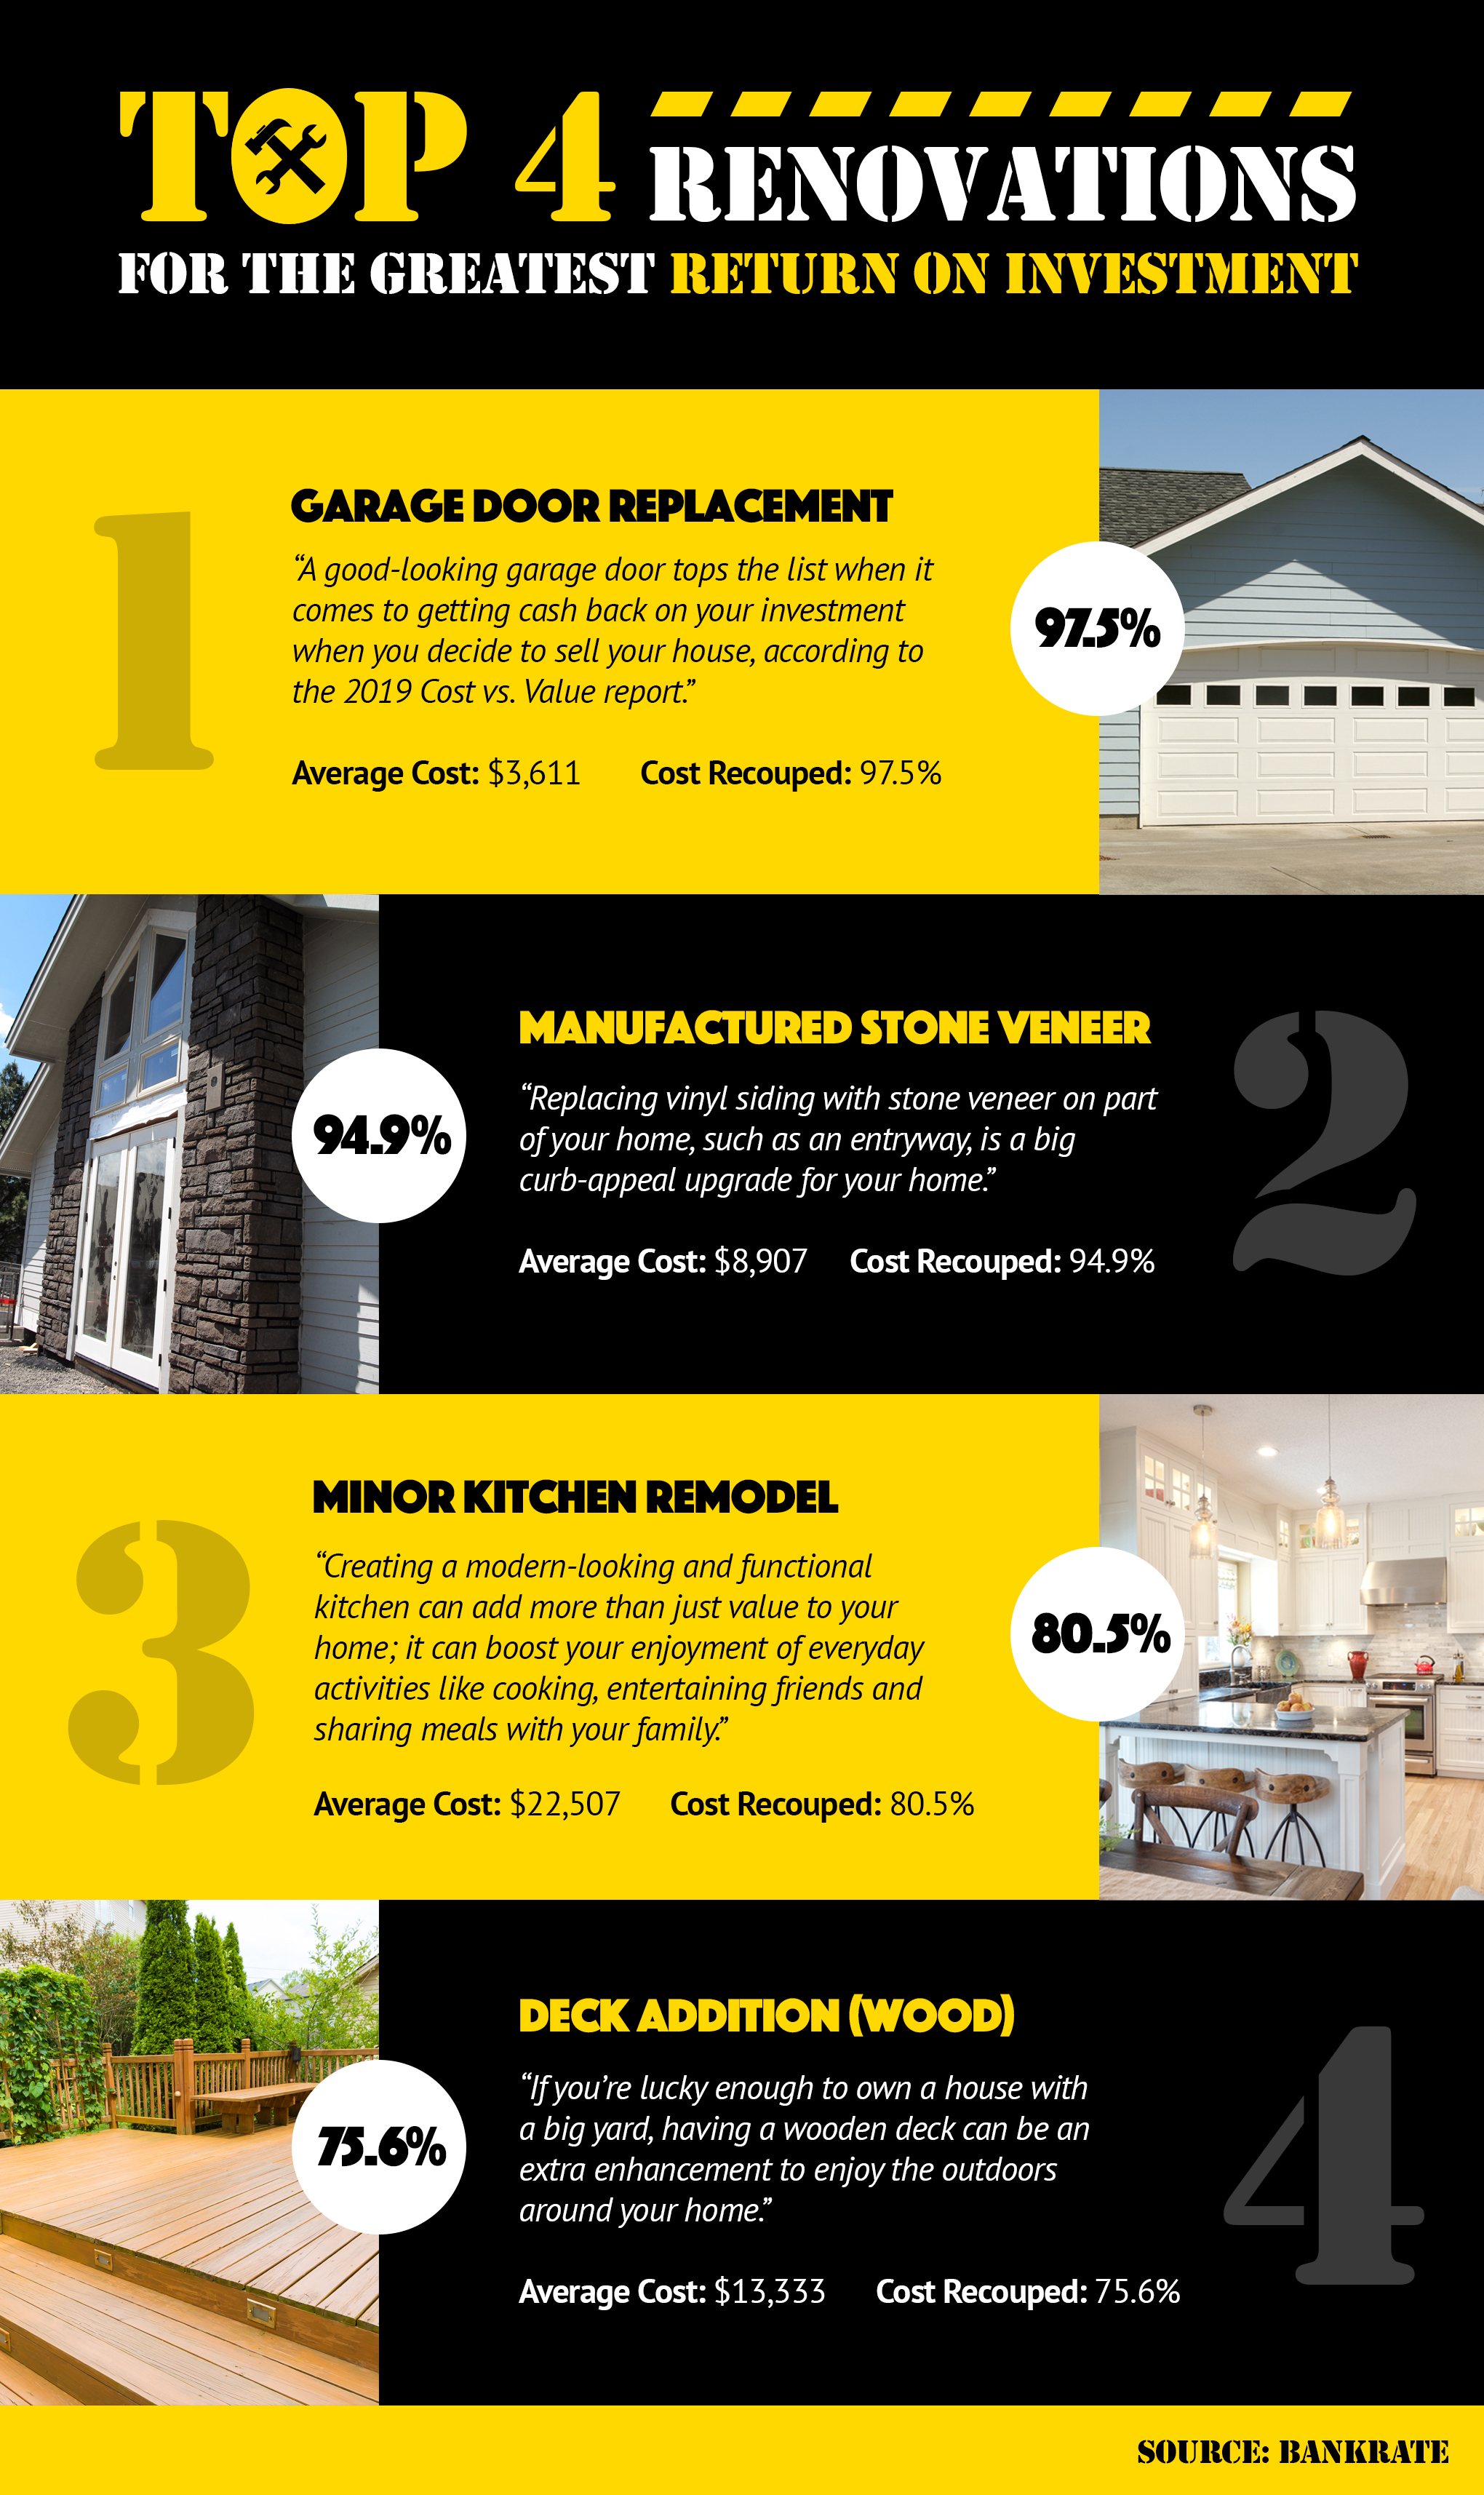 Top 4 Renovations for the Greatest Return on Investment! [INFOGRAPHIC] | MyKCM